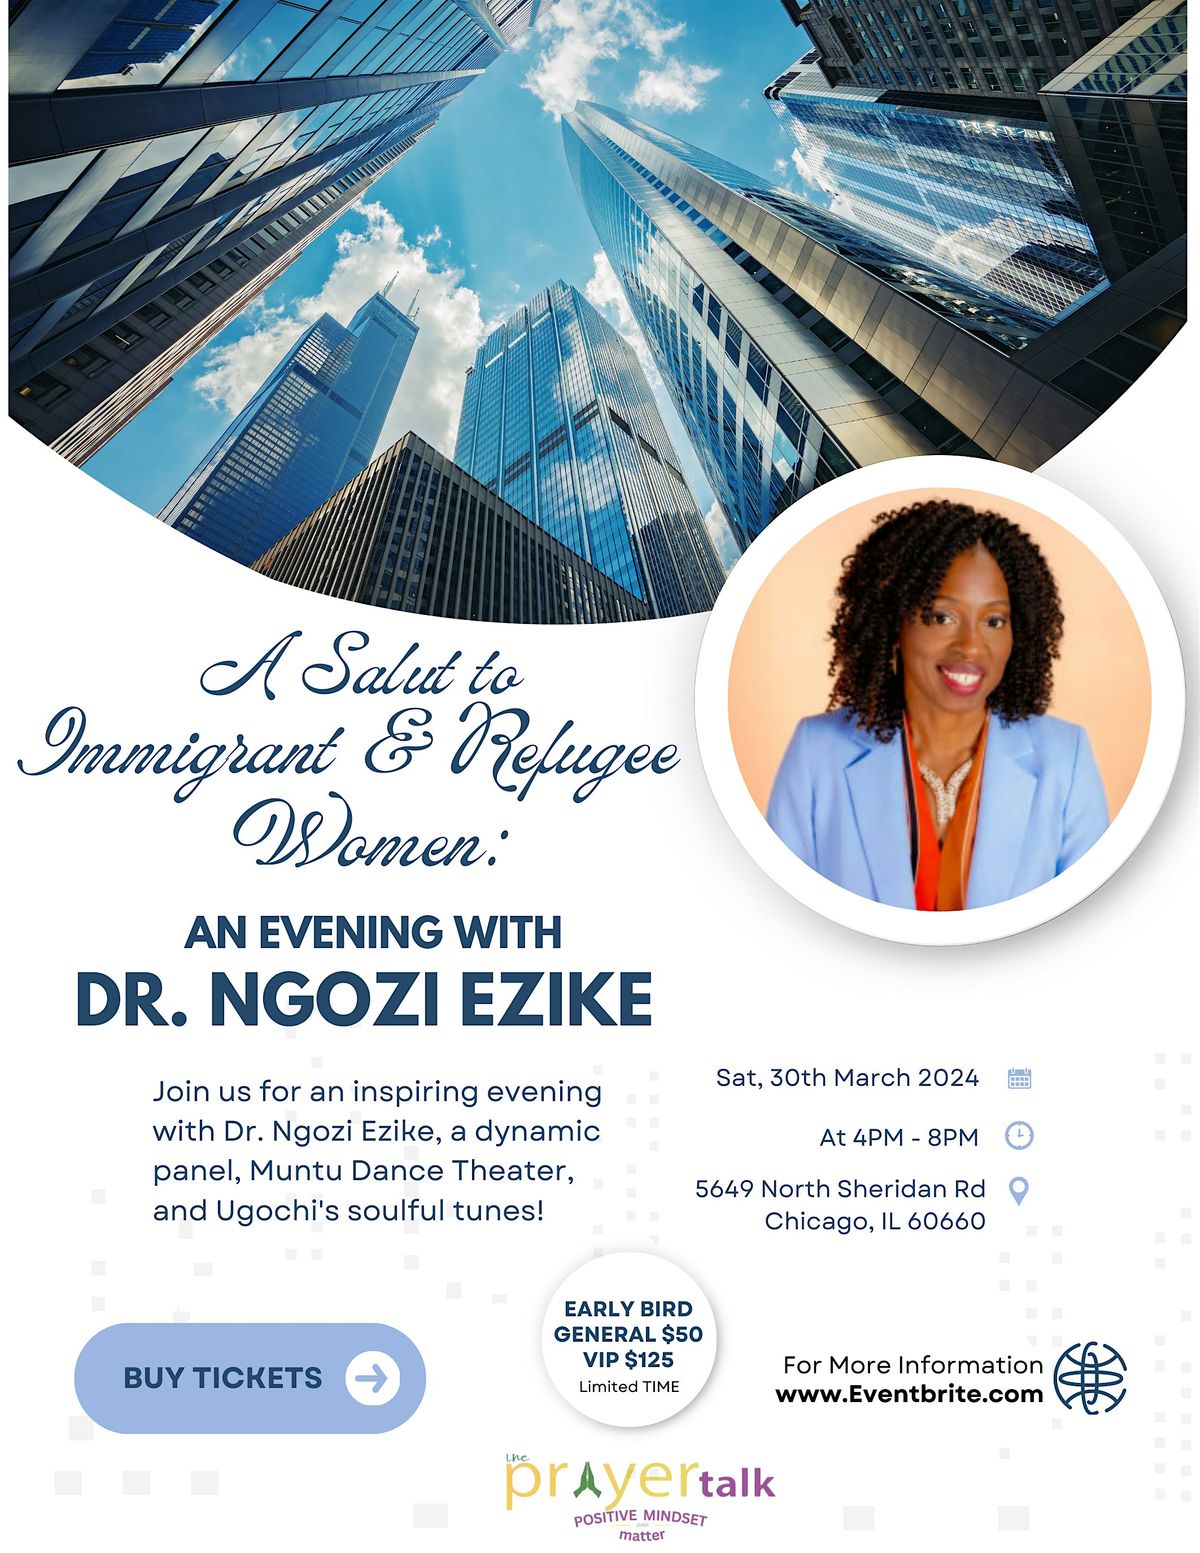 A Salut to Immigrant & Refugee Women: An Evening With Dr. Ngozi Ezike